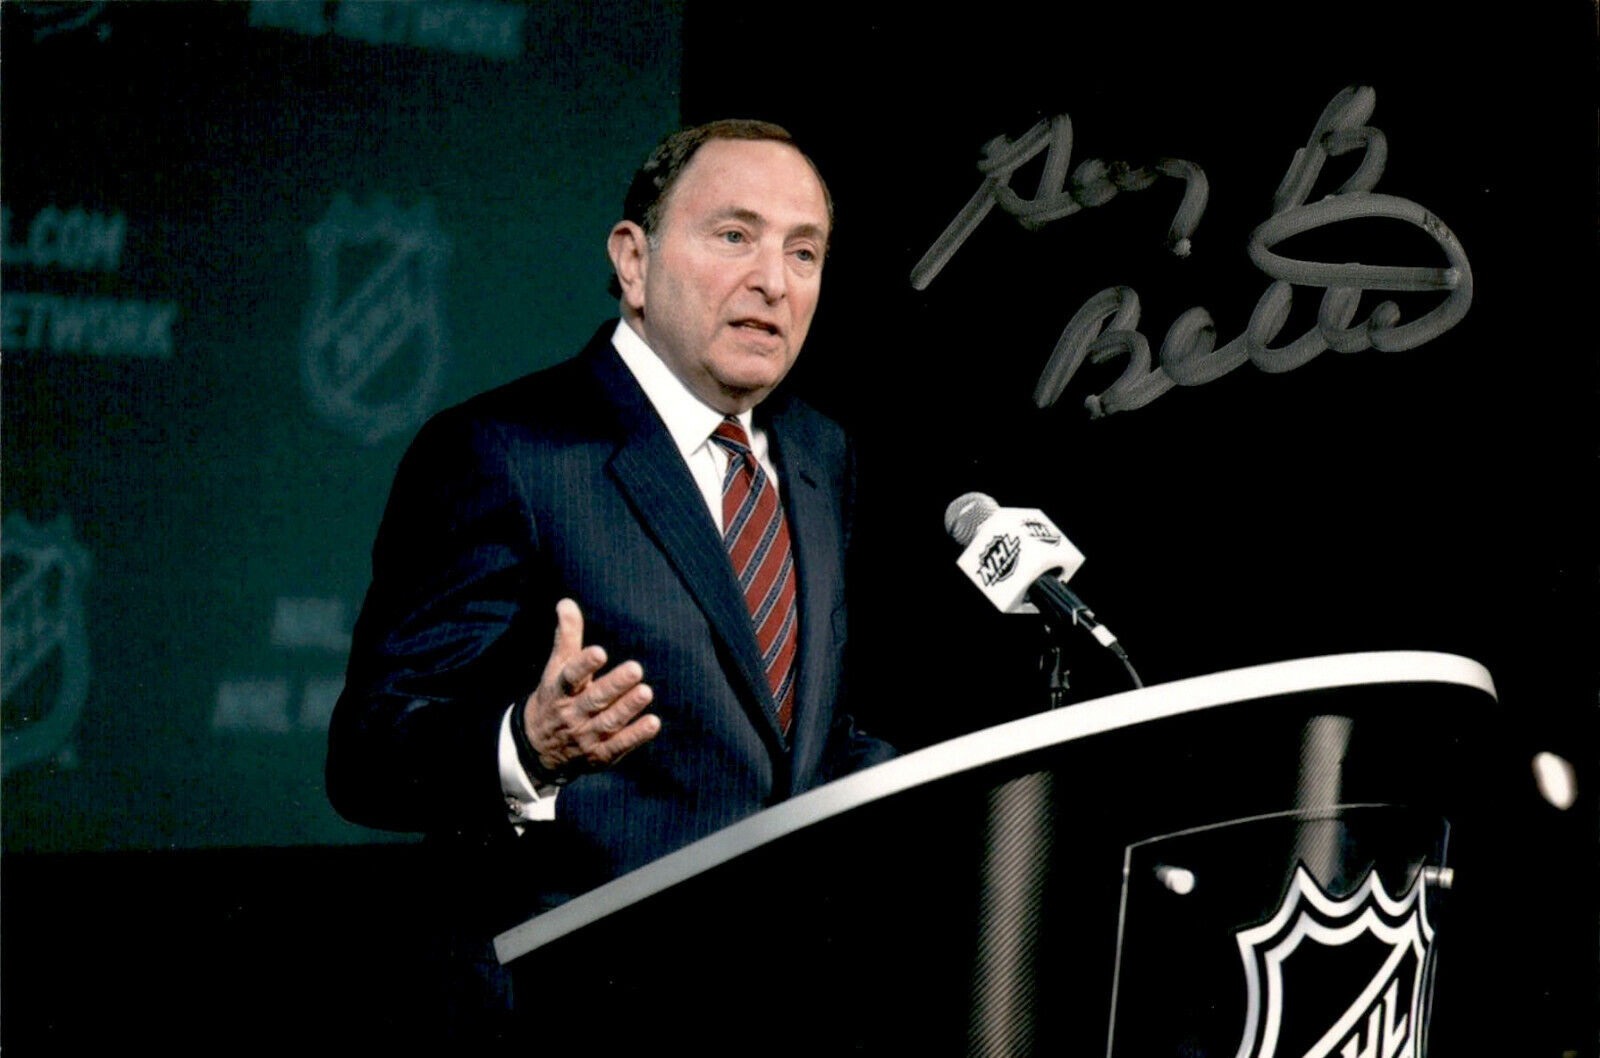 Gary Bettman SIGNED 4x6 Photo Poster painting NHL COMMISSIONER #6